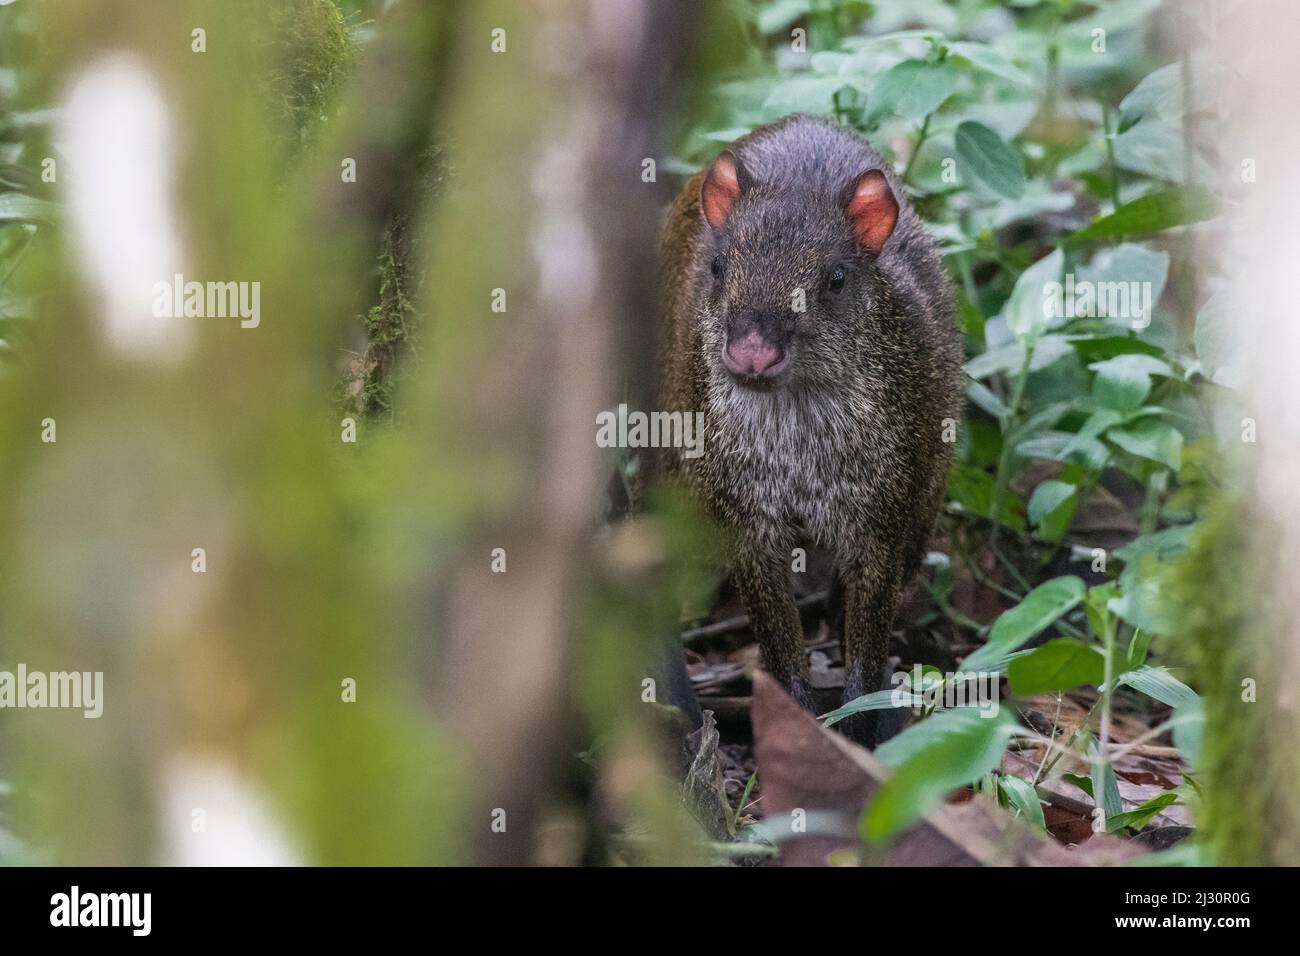 Central American agouti (Dasyprocta punctata) from the South of Ecuador in El Oro province, South America. Stock Photo